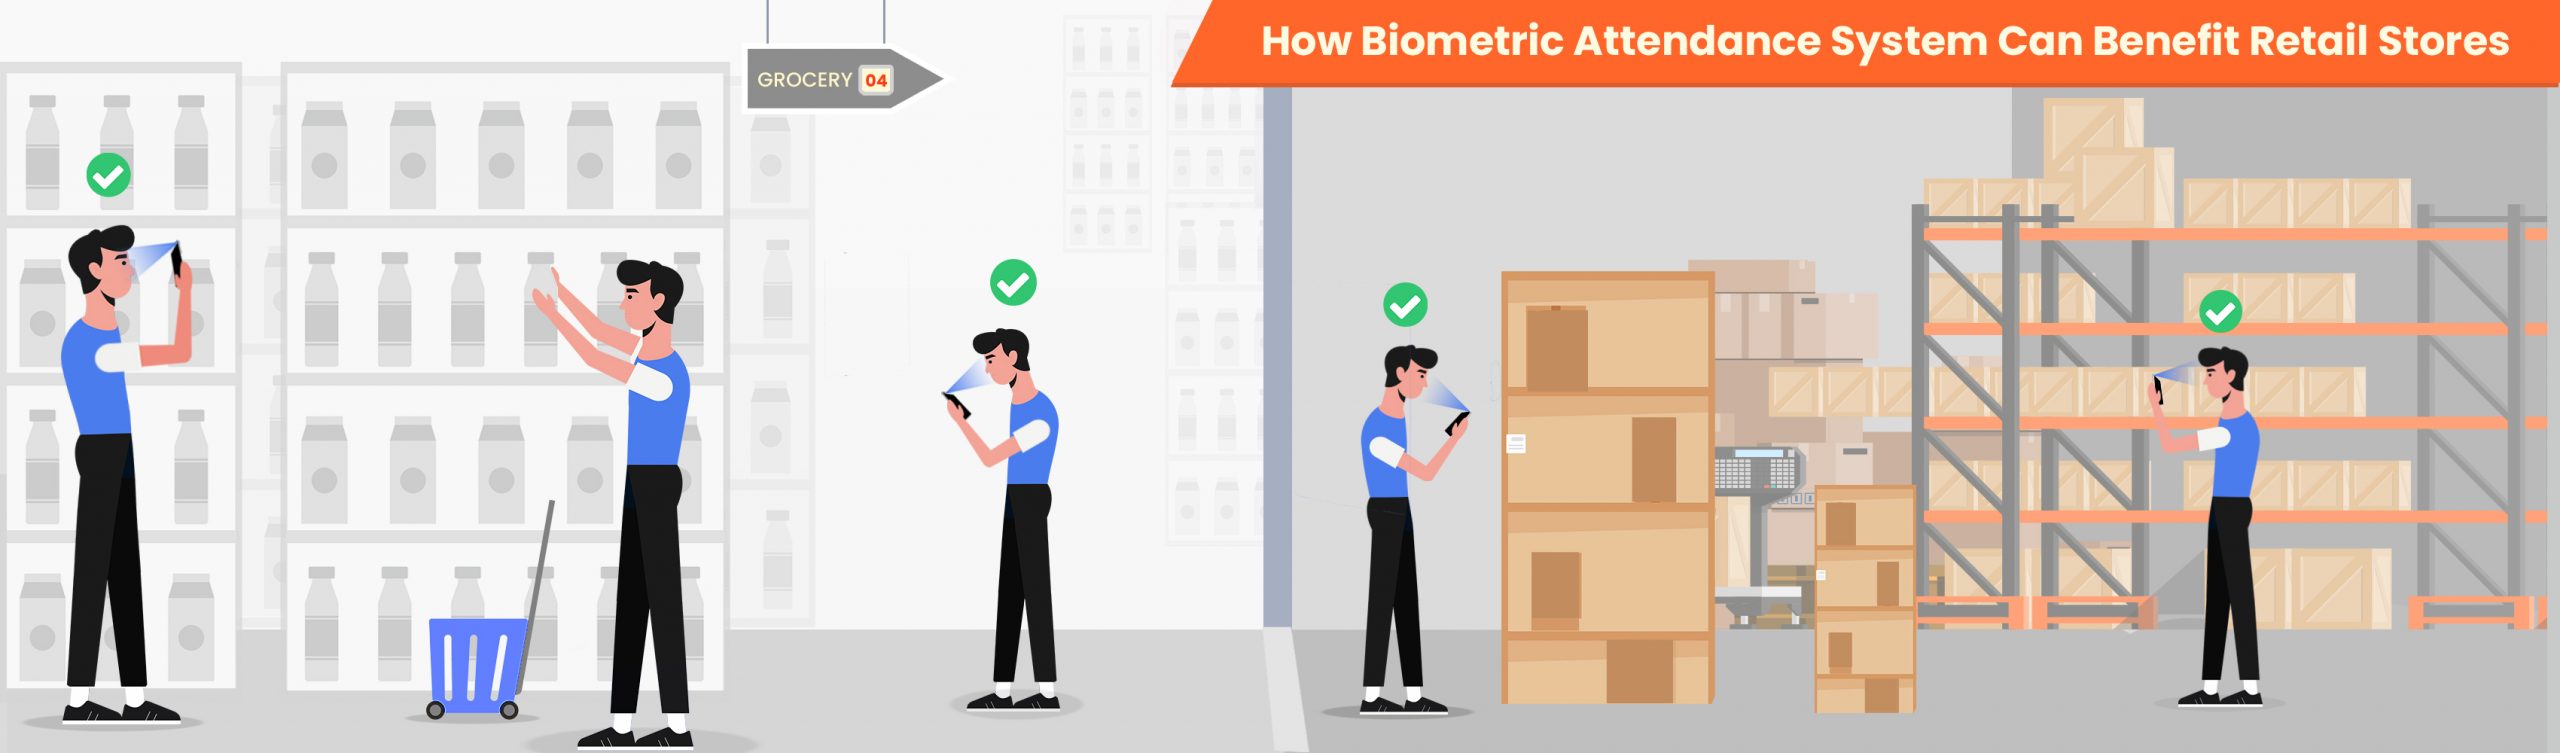 How Biometric Attendance System Can Benefit Retail Stores?